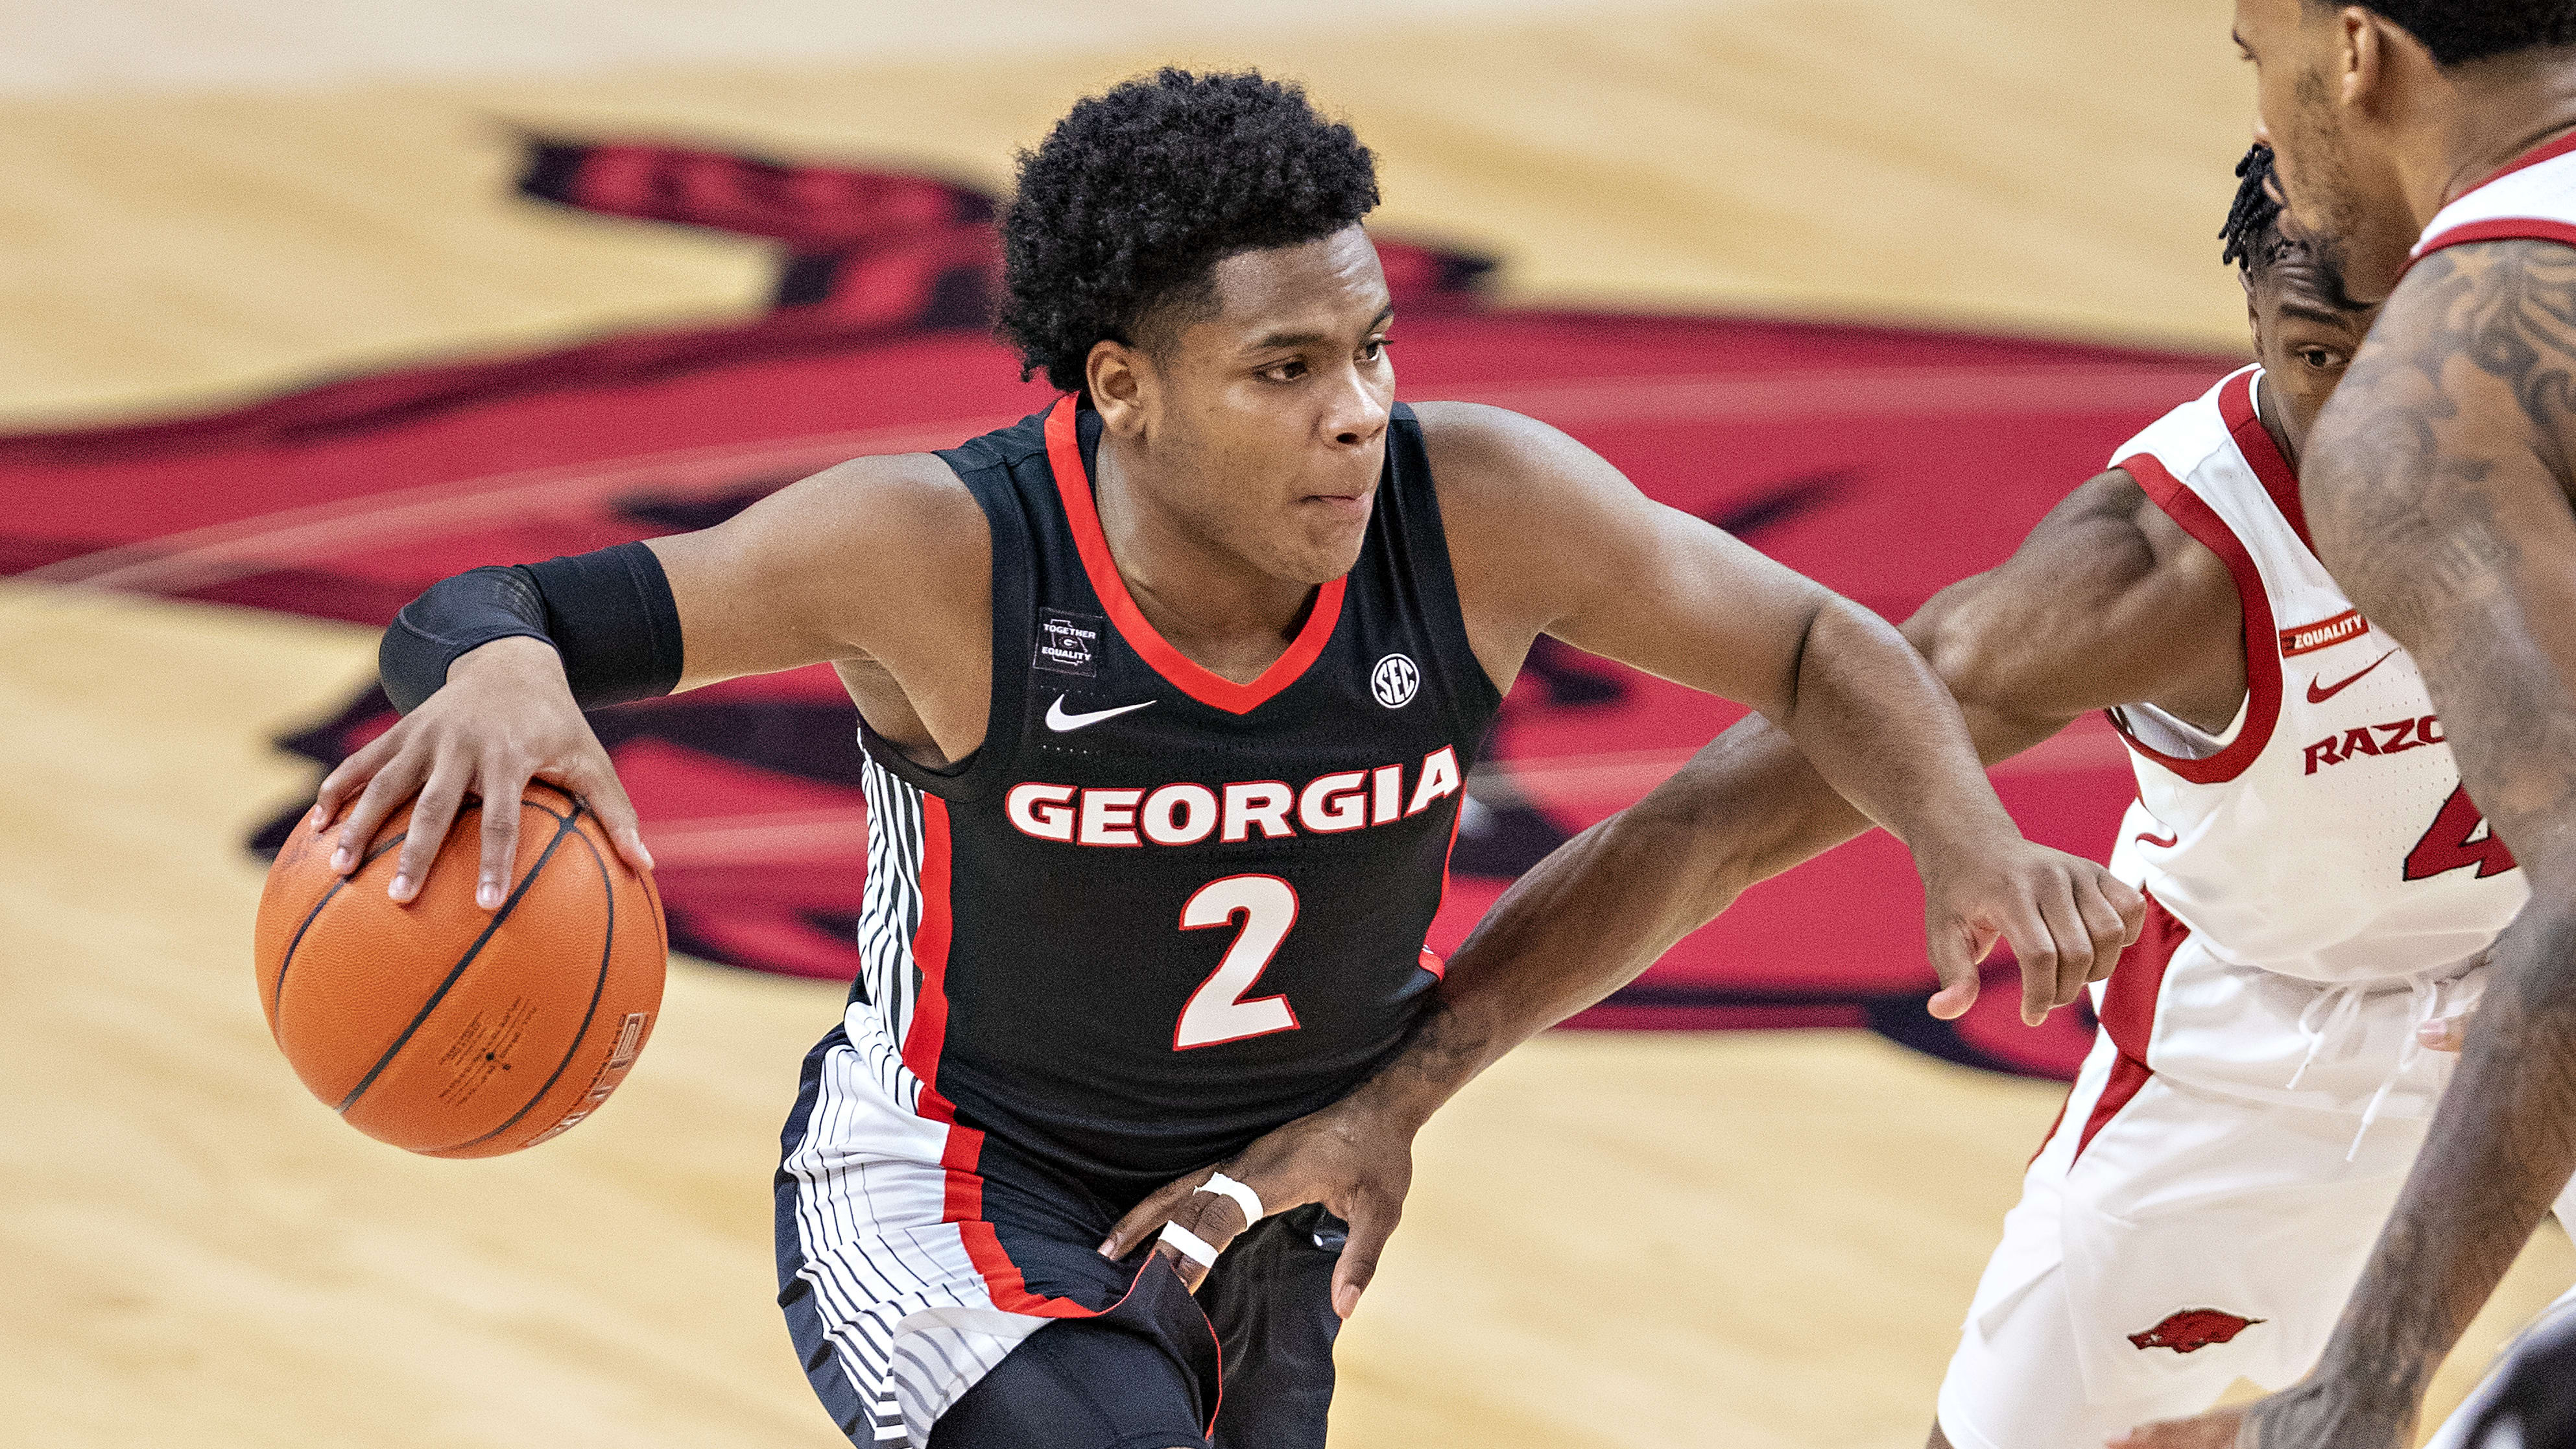 LSU vs Georgia Spread, Line, Odds, Predictions & Betting Insights for College Basketball Game